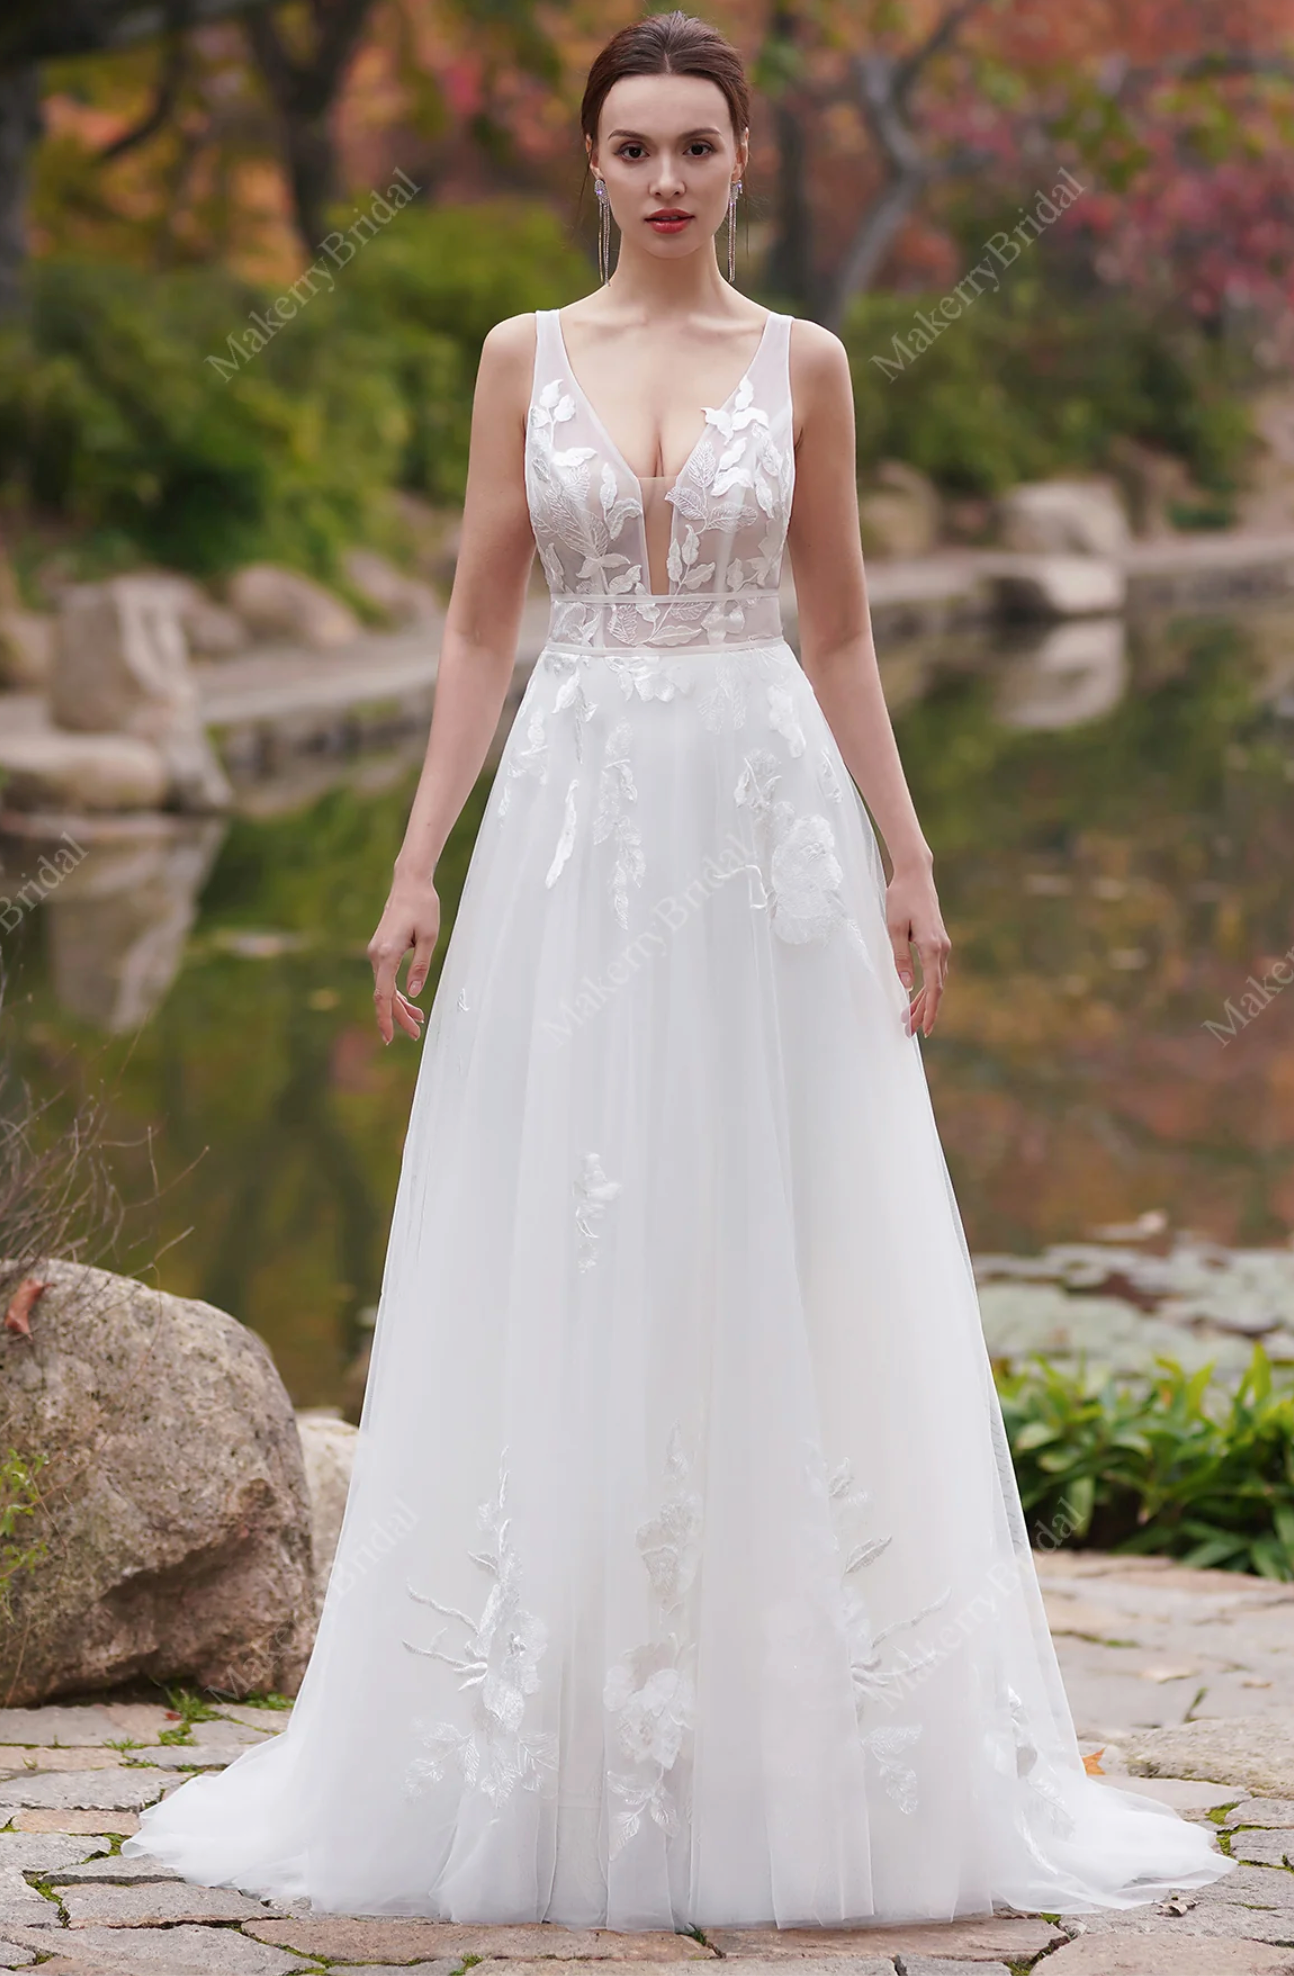 Exquisite A-Line Oversized Floral Motifs Boho Wedding Gown